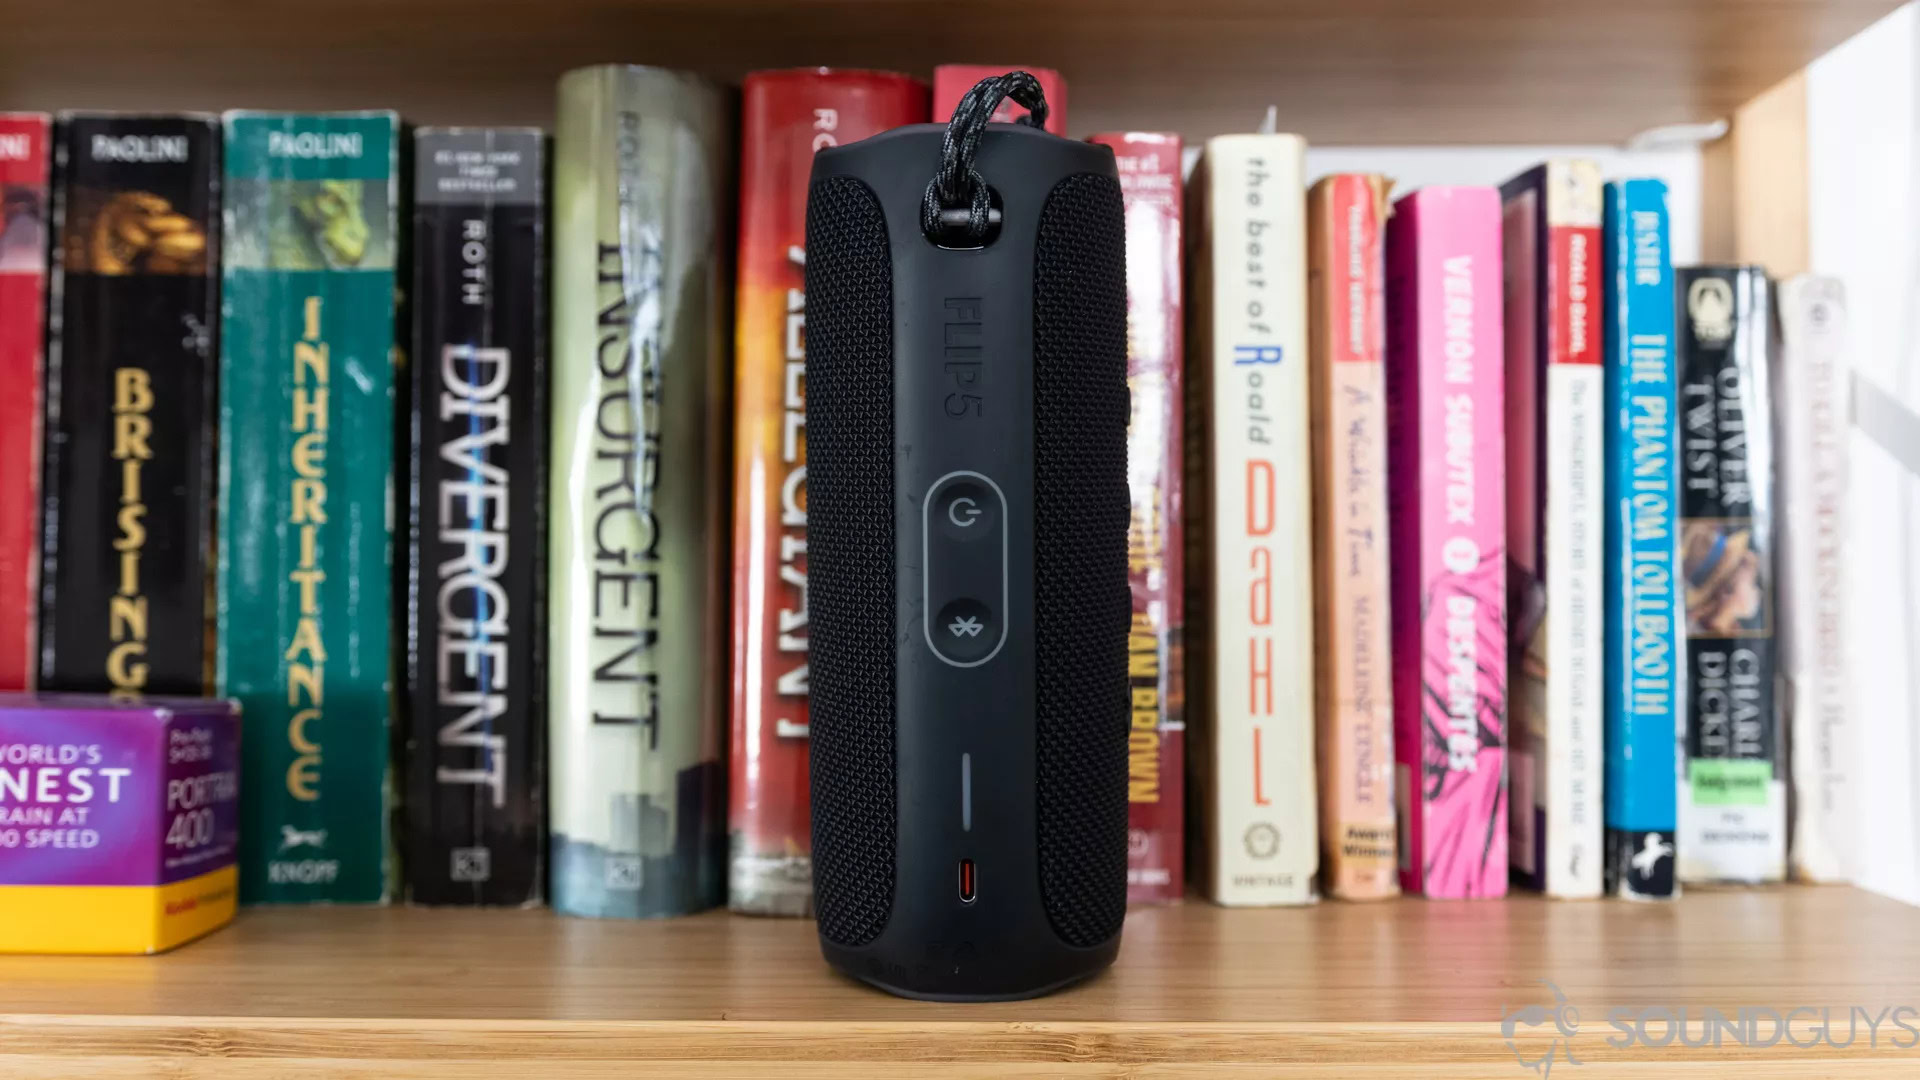 A JBL Flip 5 on bookshelf with the power button Bluetooth buttons visible.